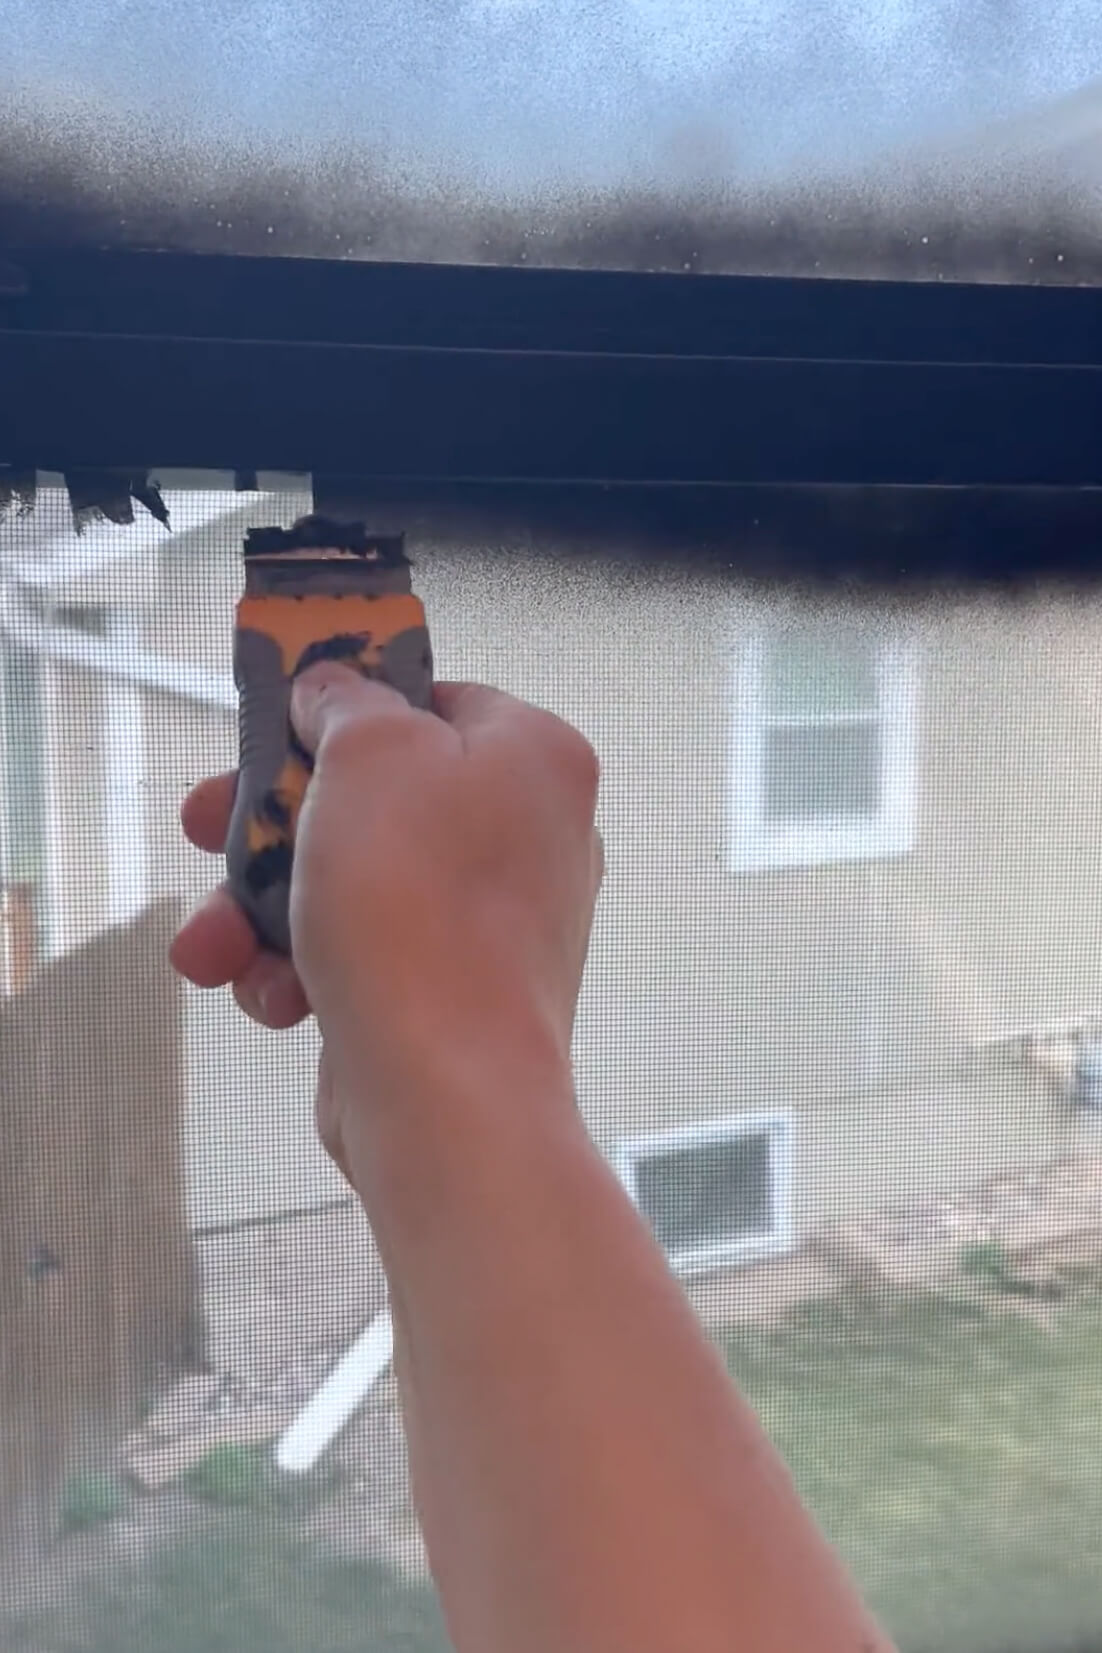 Scraping paint off of the window using a razor blade.